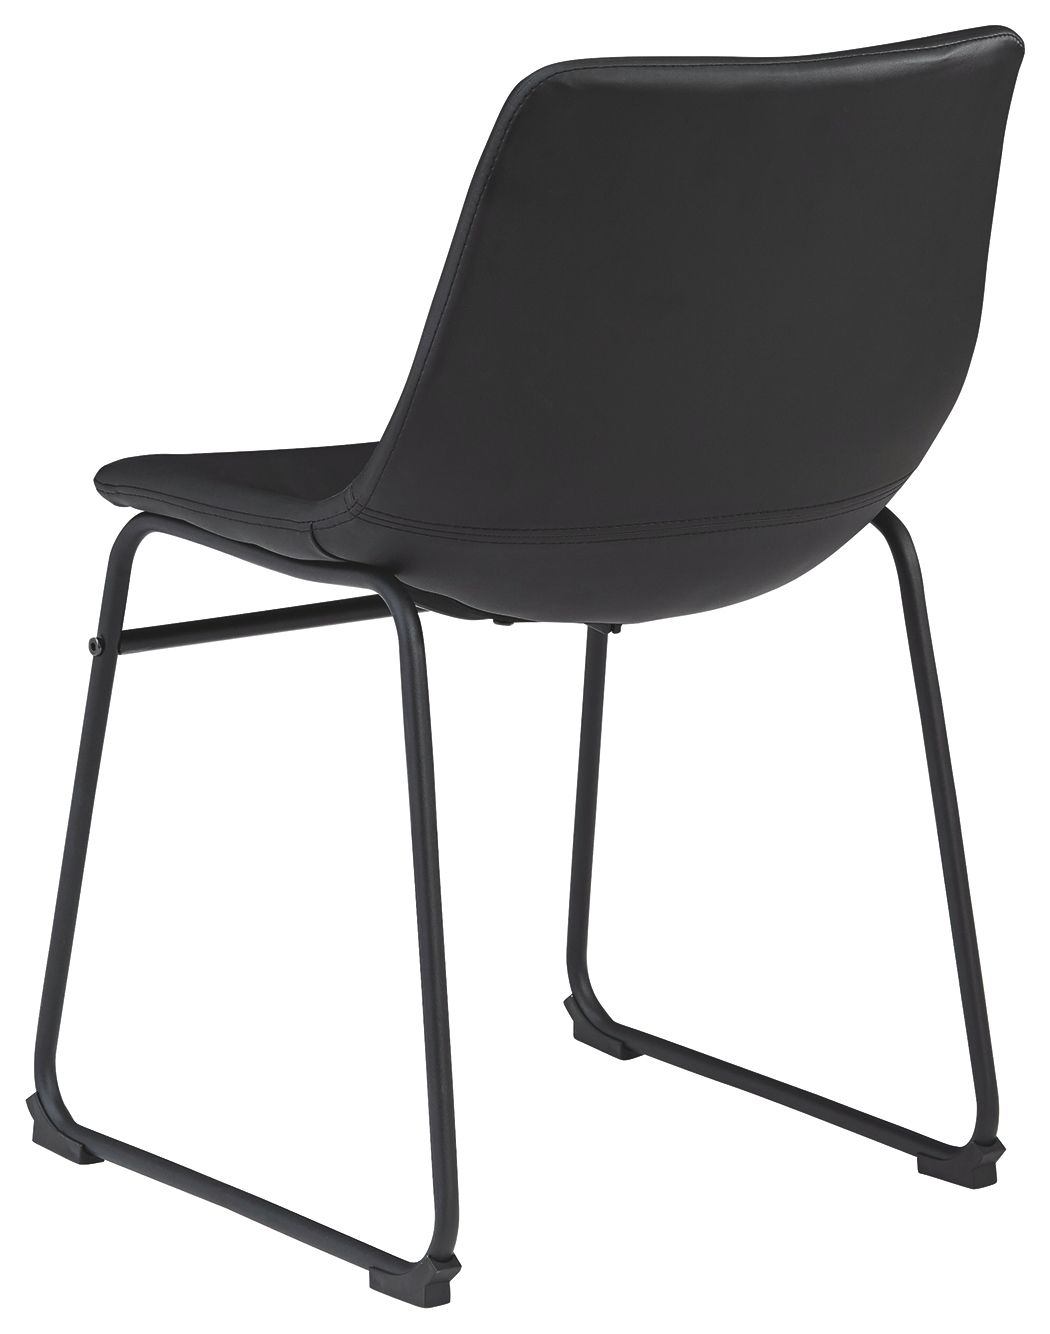 Centiar - Upholstered Side Chair - Tony's Home Furnishings